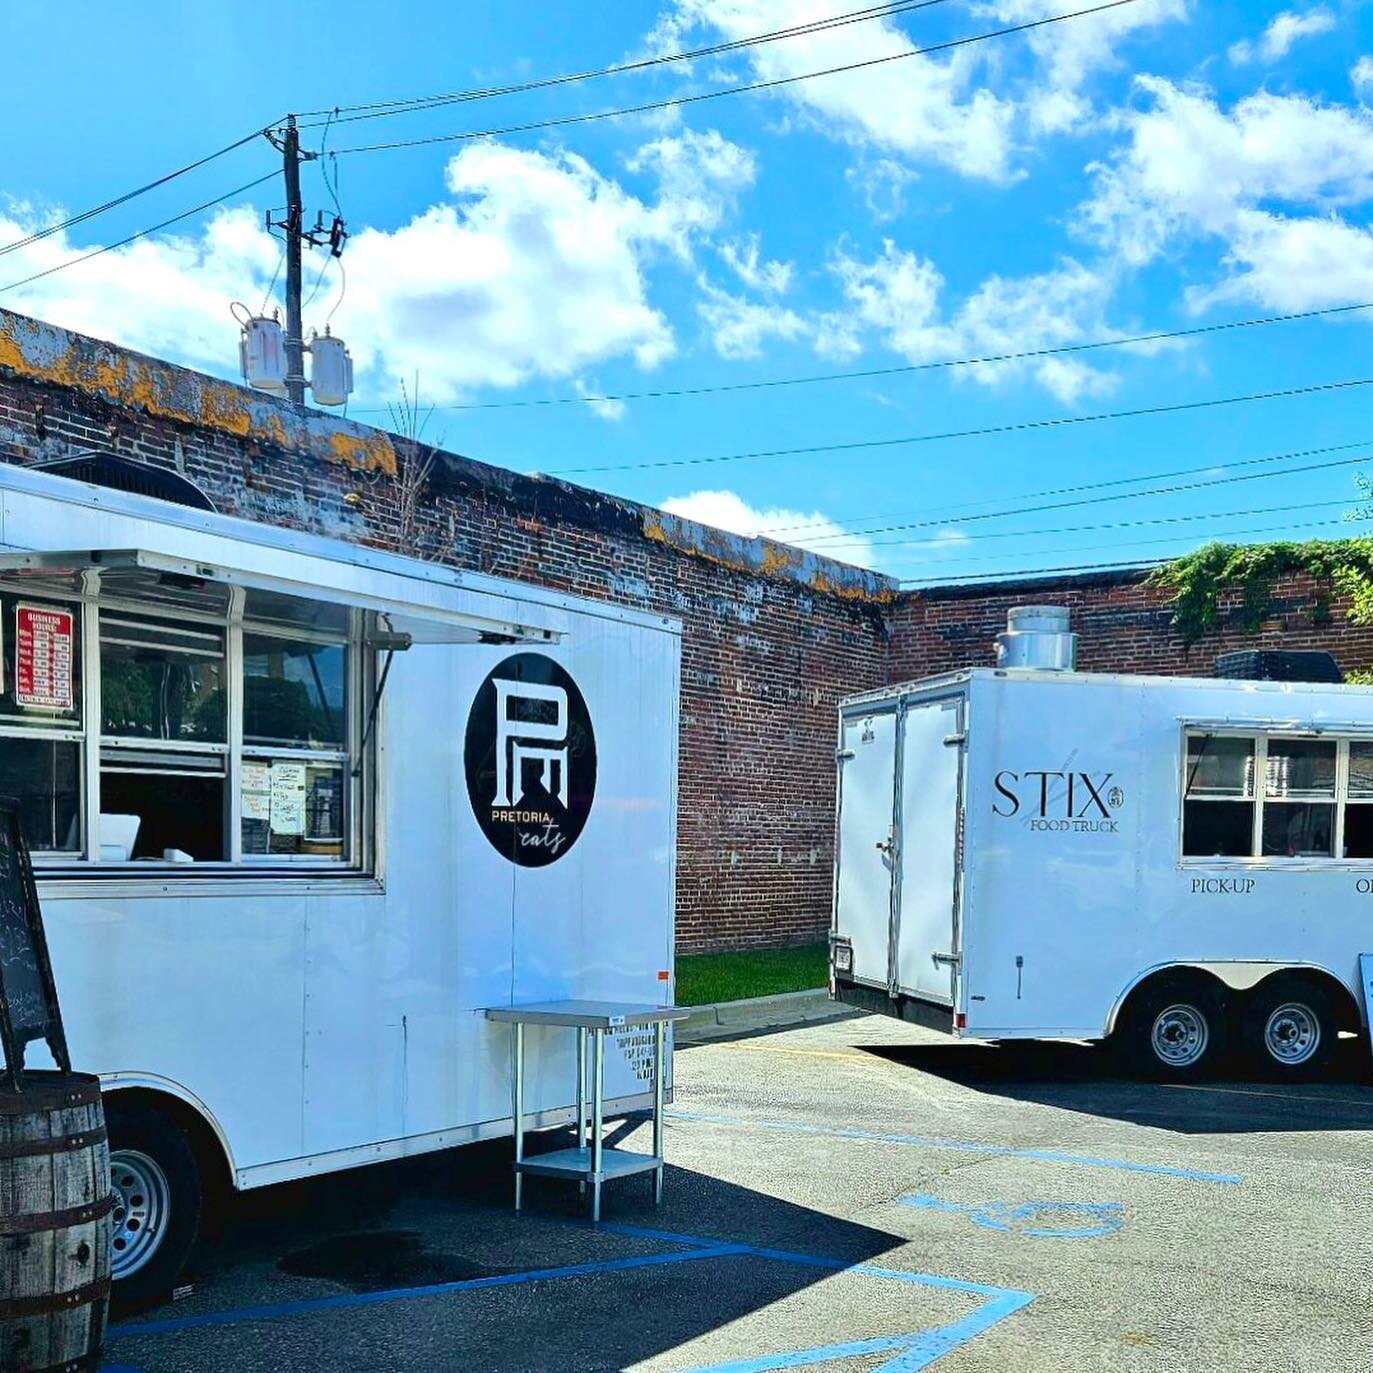 Fourth Saturday Market is starting in one hour &amp; the food trucks are here! Welcome @stixsylvesterga &amp; @foodiepopsga ! Head to @downtownalbanygeorgia to eat, drink and shop local! With live music from @sundownermotel from 1-5 and Electric Junk